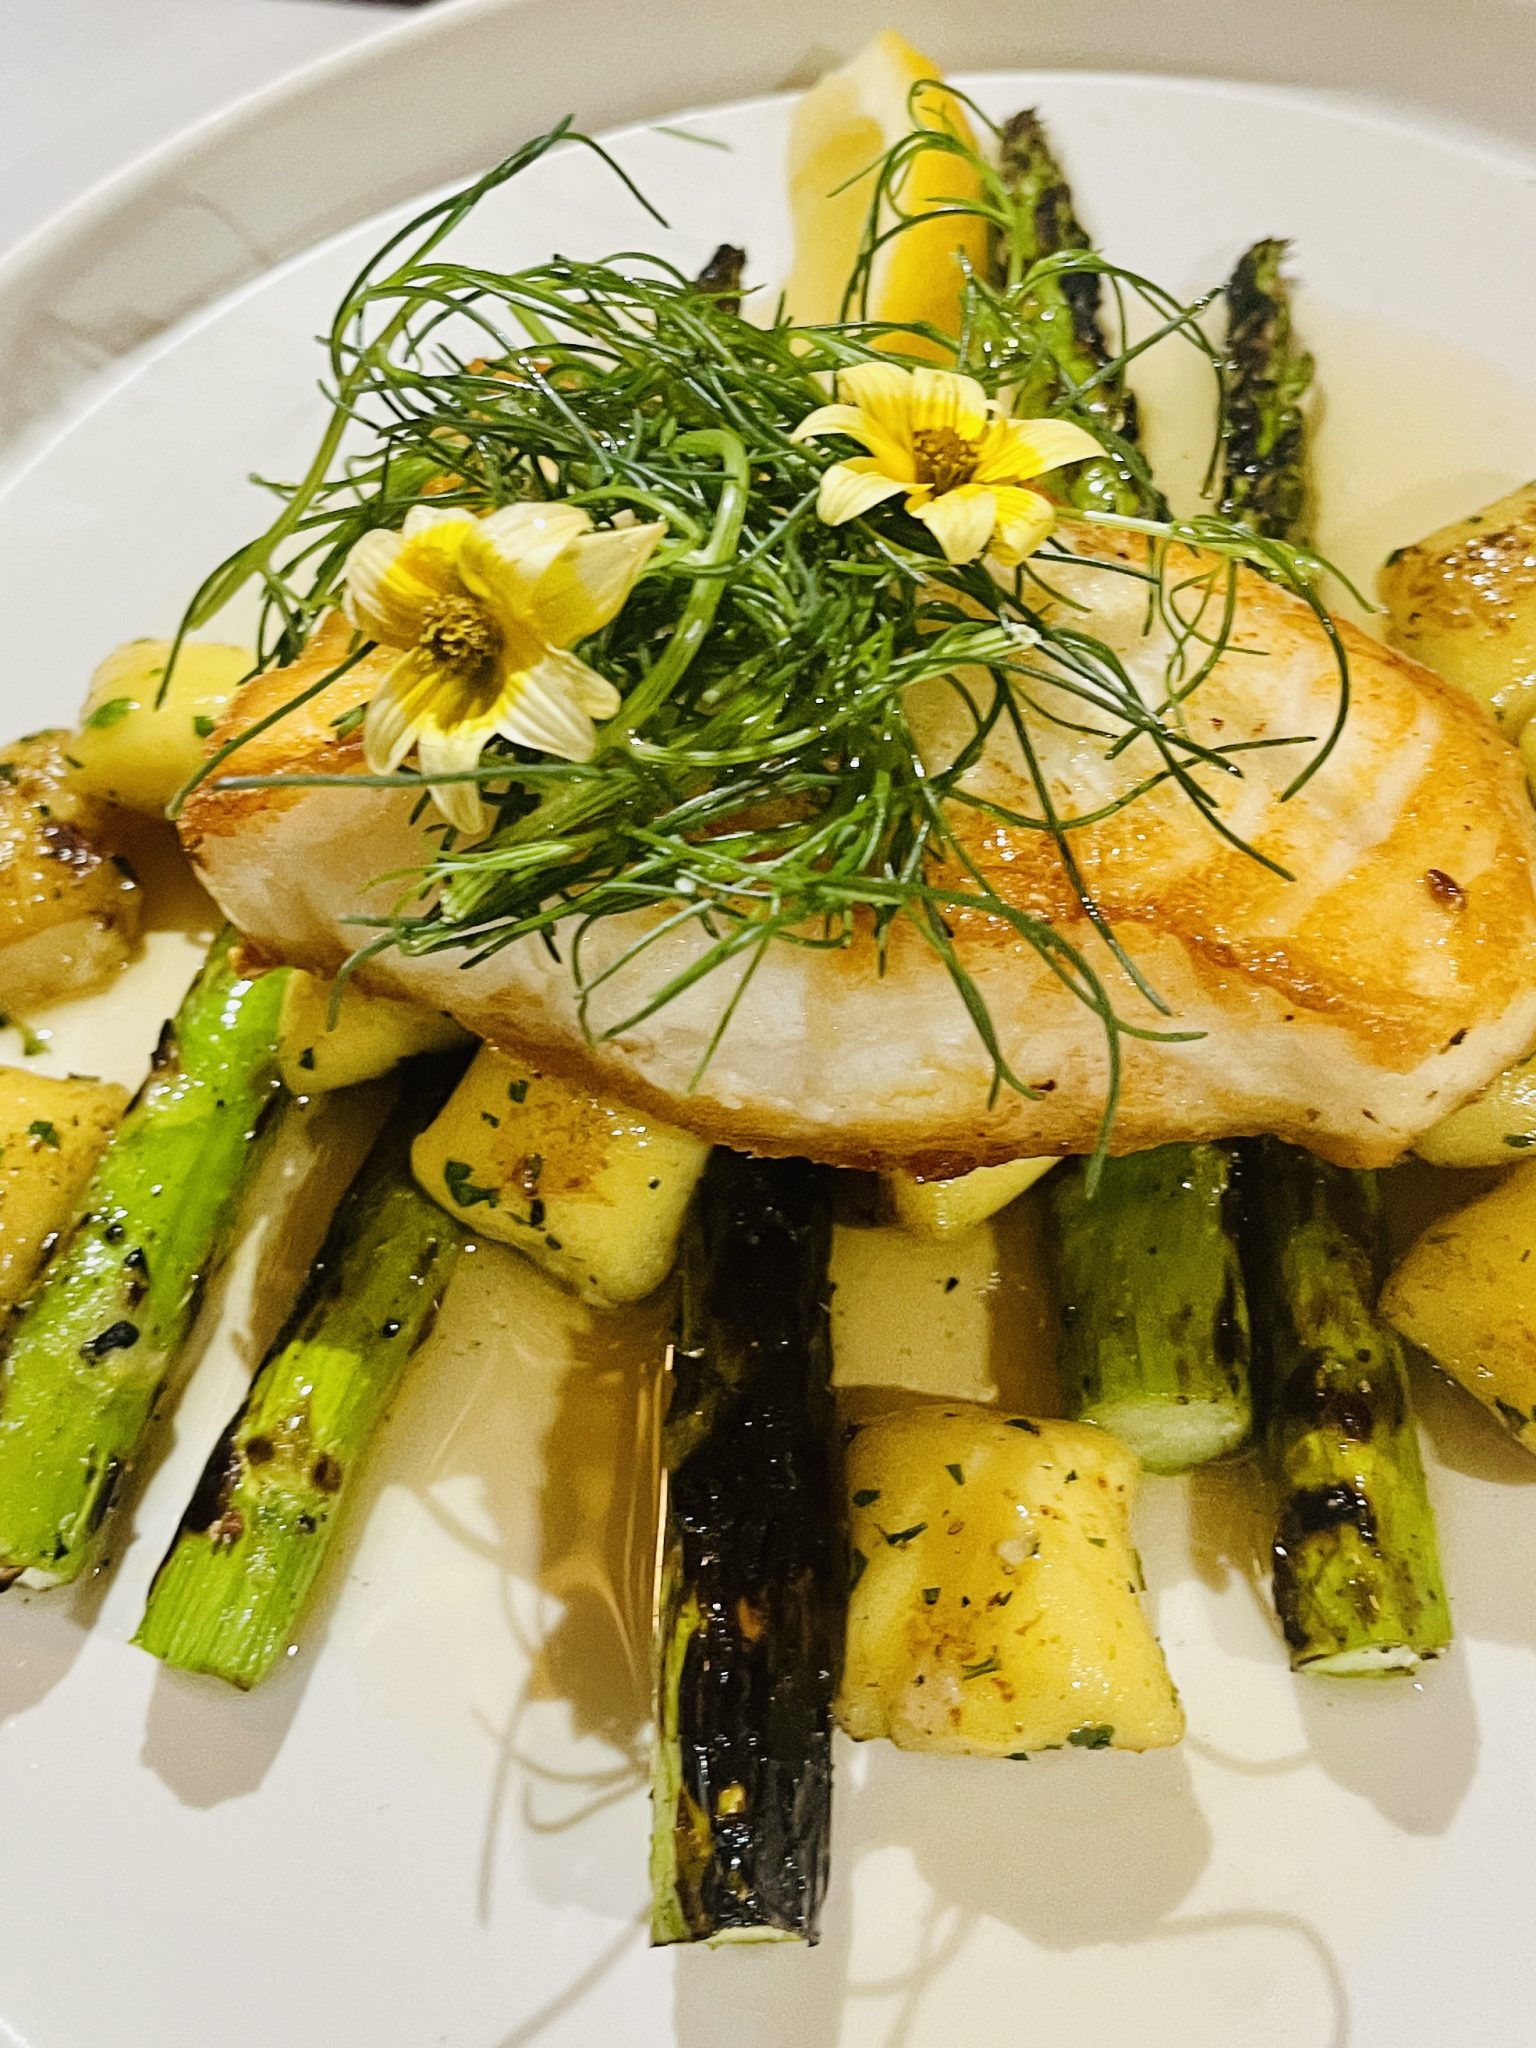 The seabass with asparagus was absolutely delicious at JW Marriott Anaheim tocca Ferro